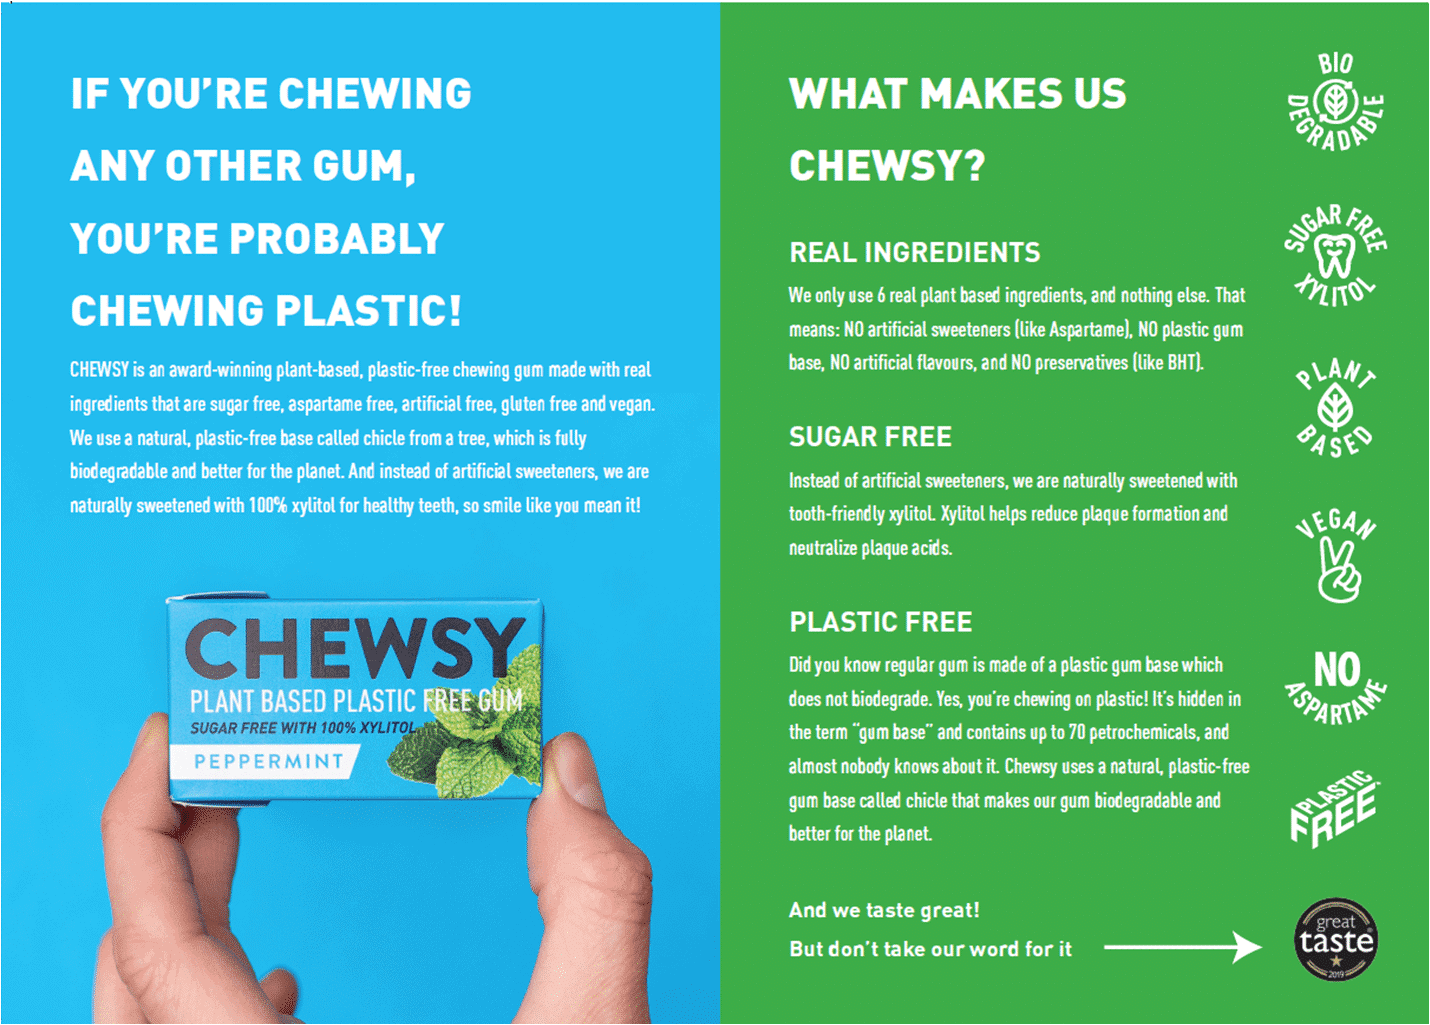 Should plastic gum base be replaced with a plant-based alternative